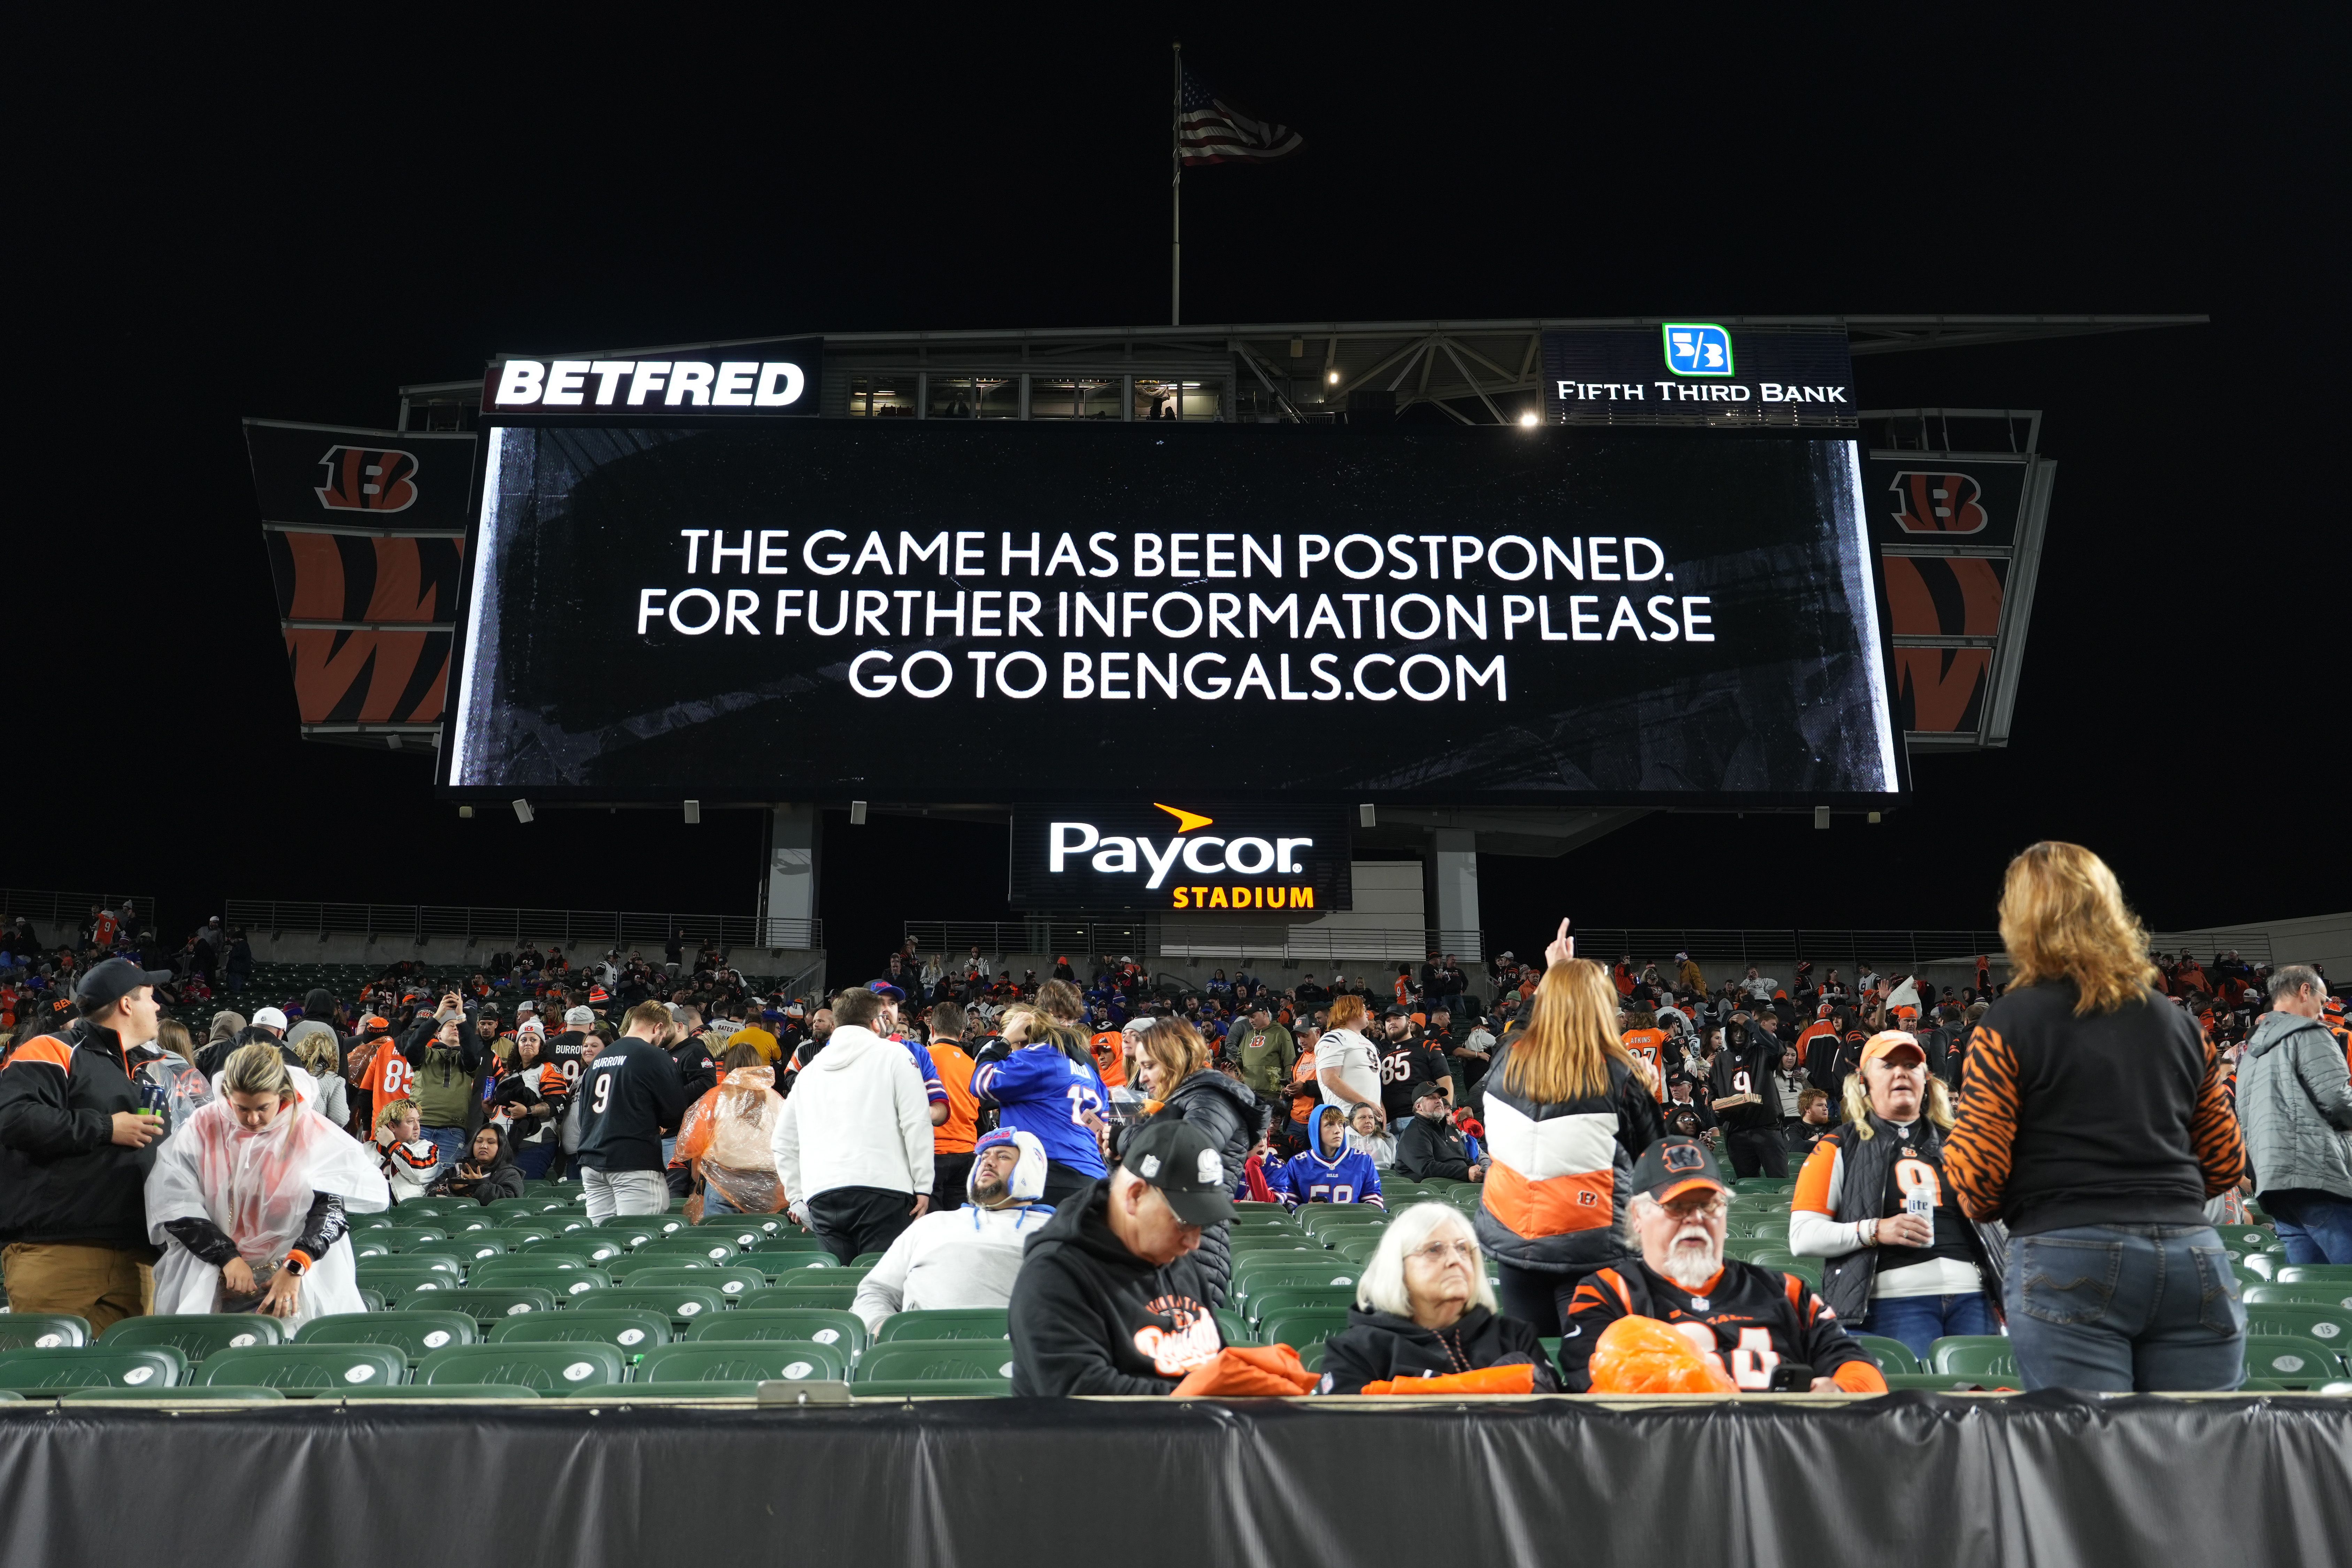 The postponement message shown at Paycor Stadium. Photo: Dylan Buell/Getty Images